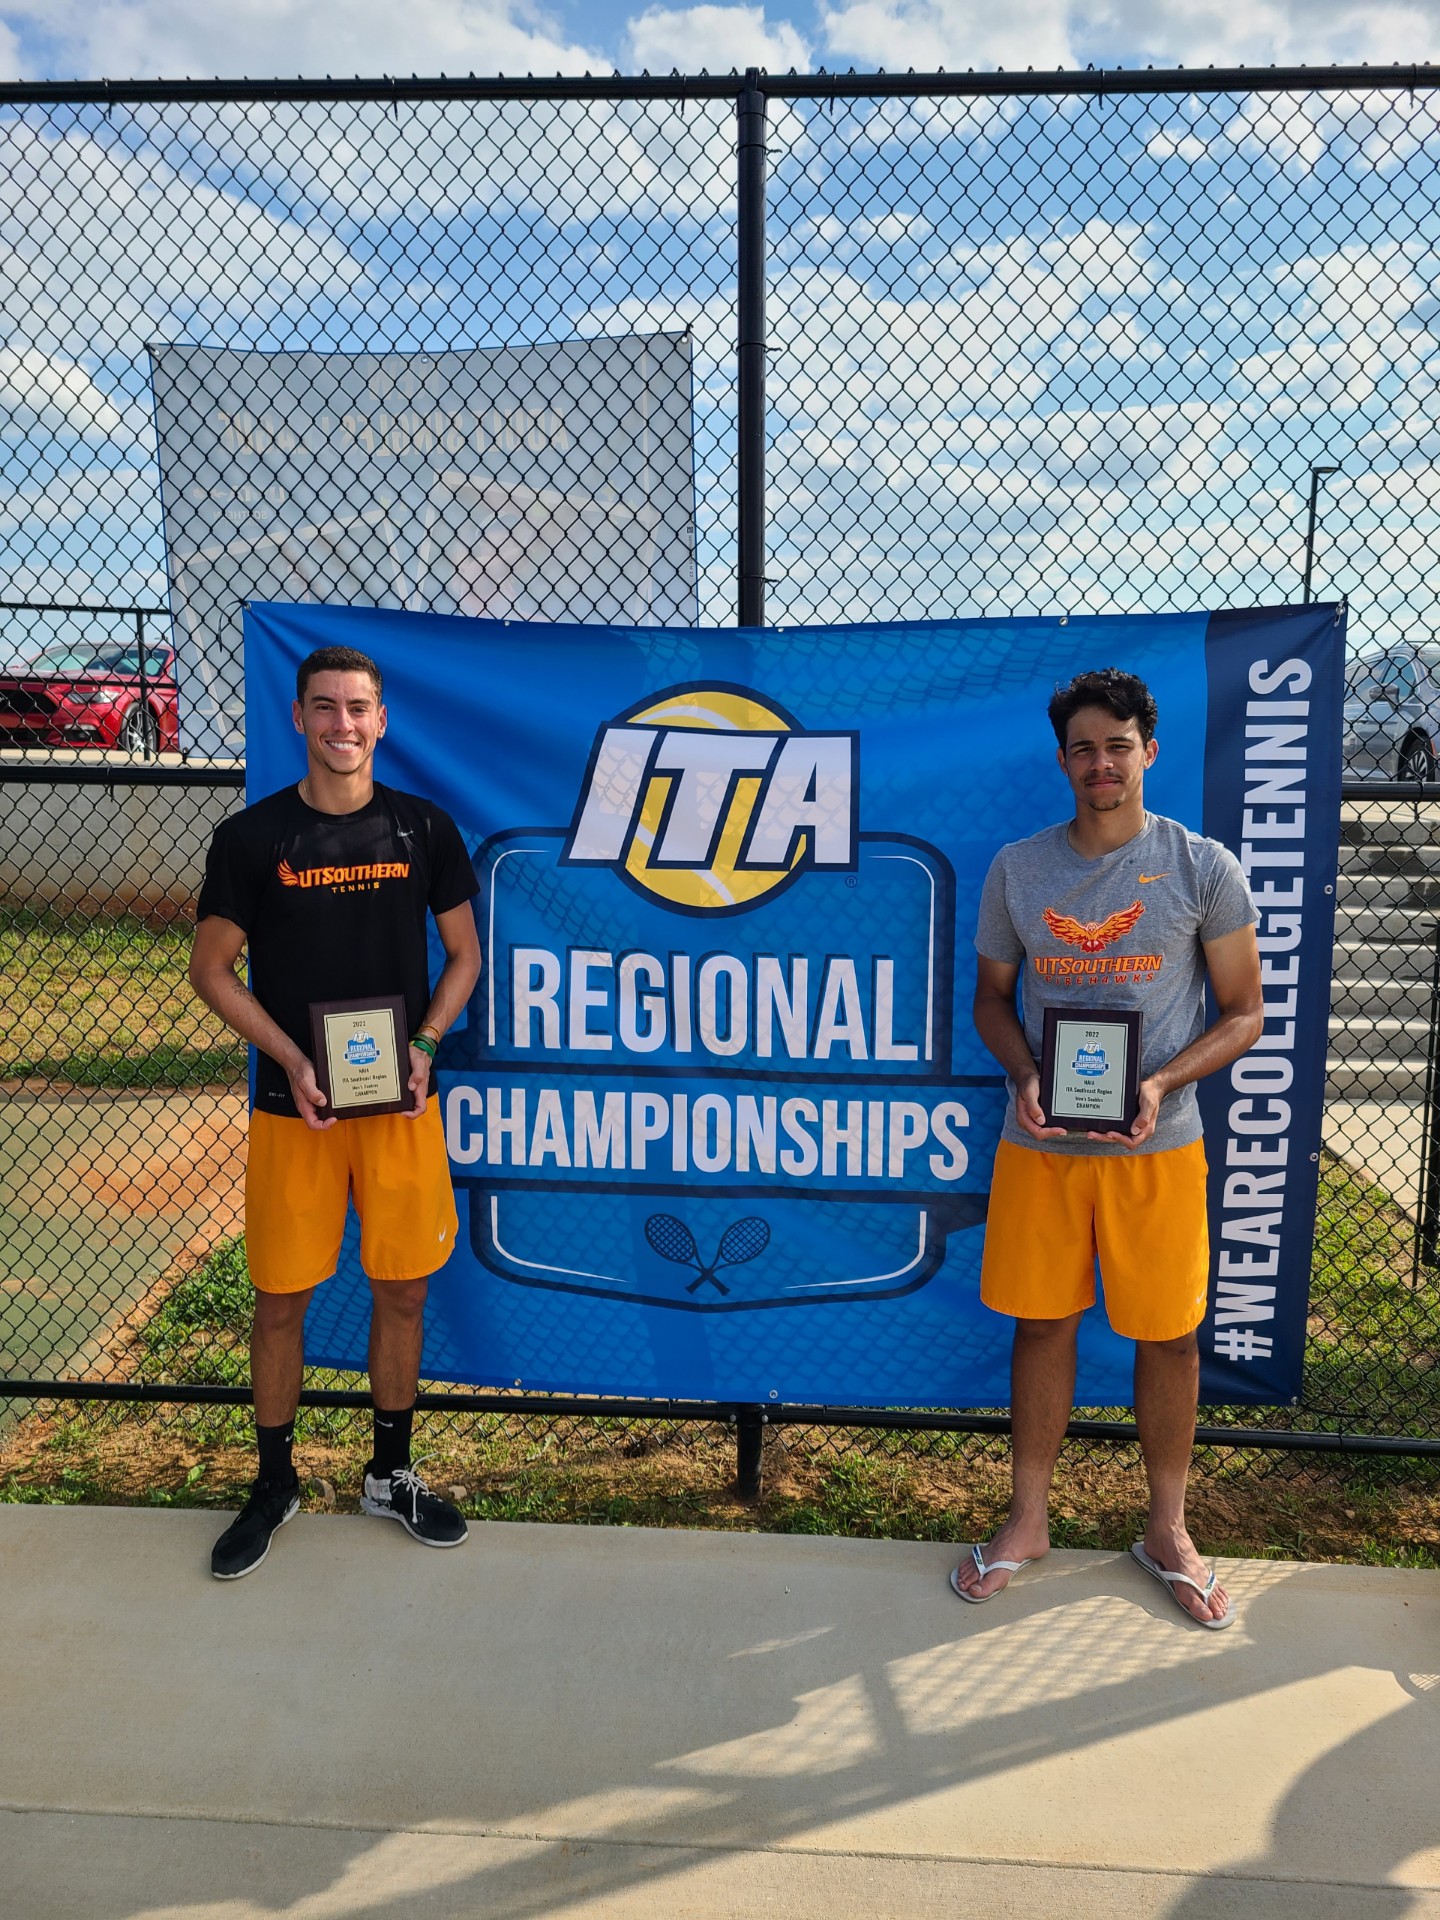 Tennessee Southern Men's Doubles Team Clinch a spot in ITA National Championships